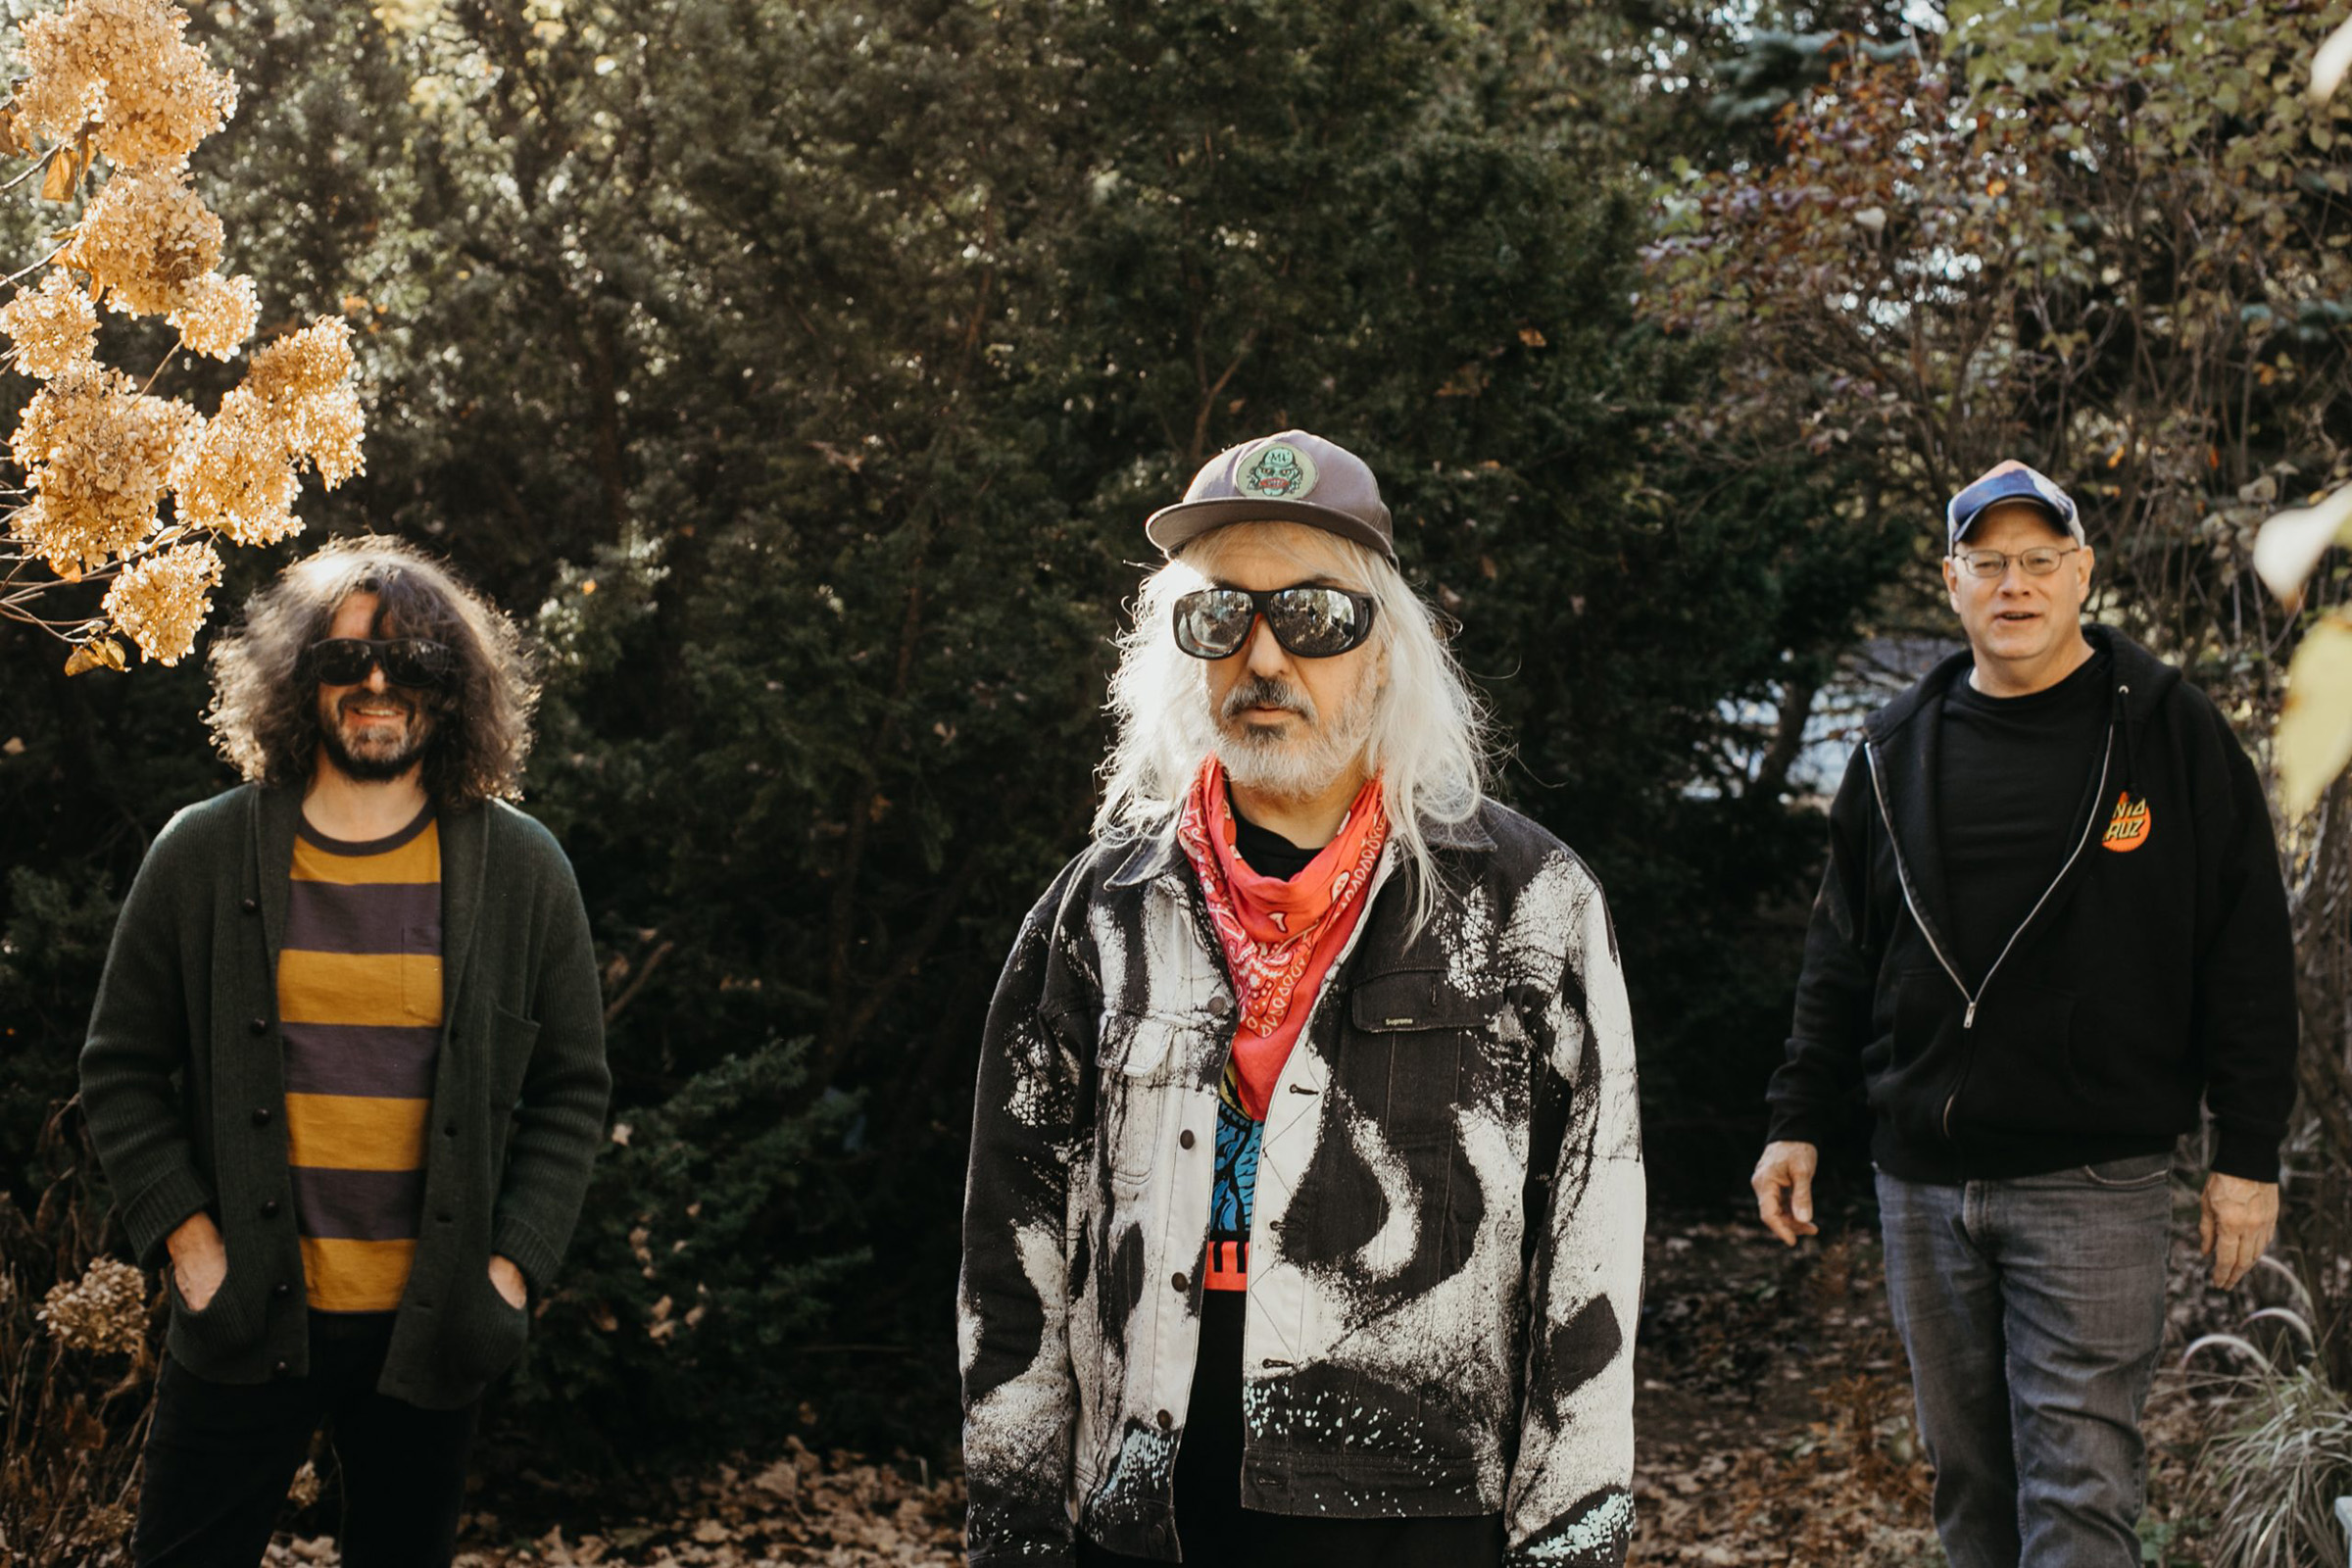 DINOSAUR JR. share video for new single 'Garden' - taken from new album 'Sweep It Into Space' out April 23rd 